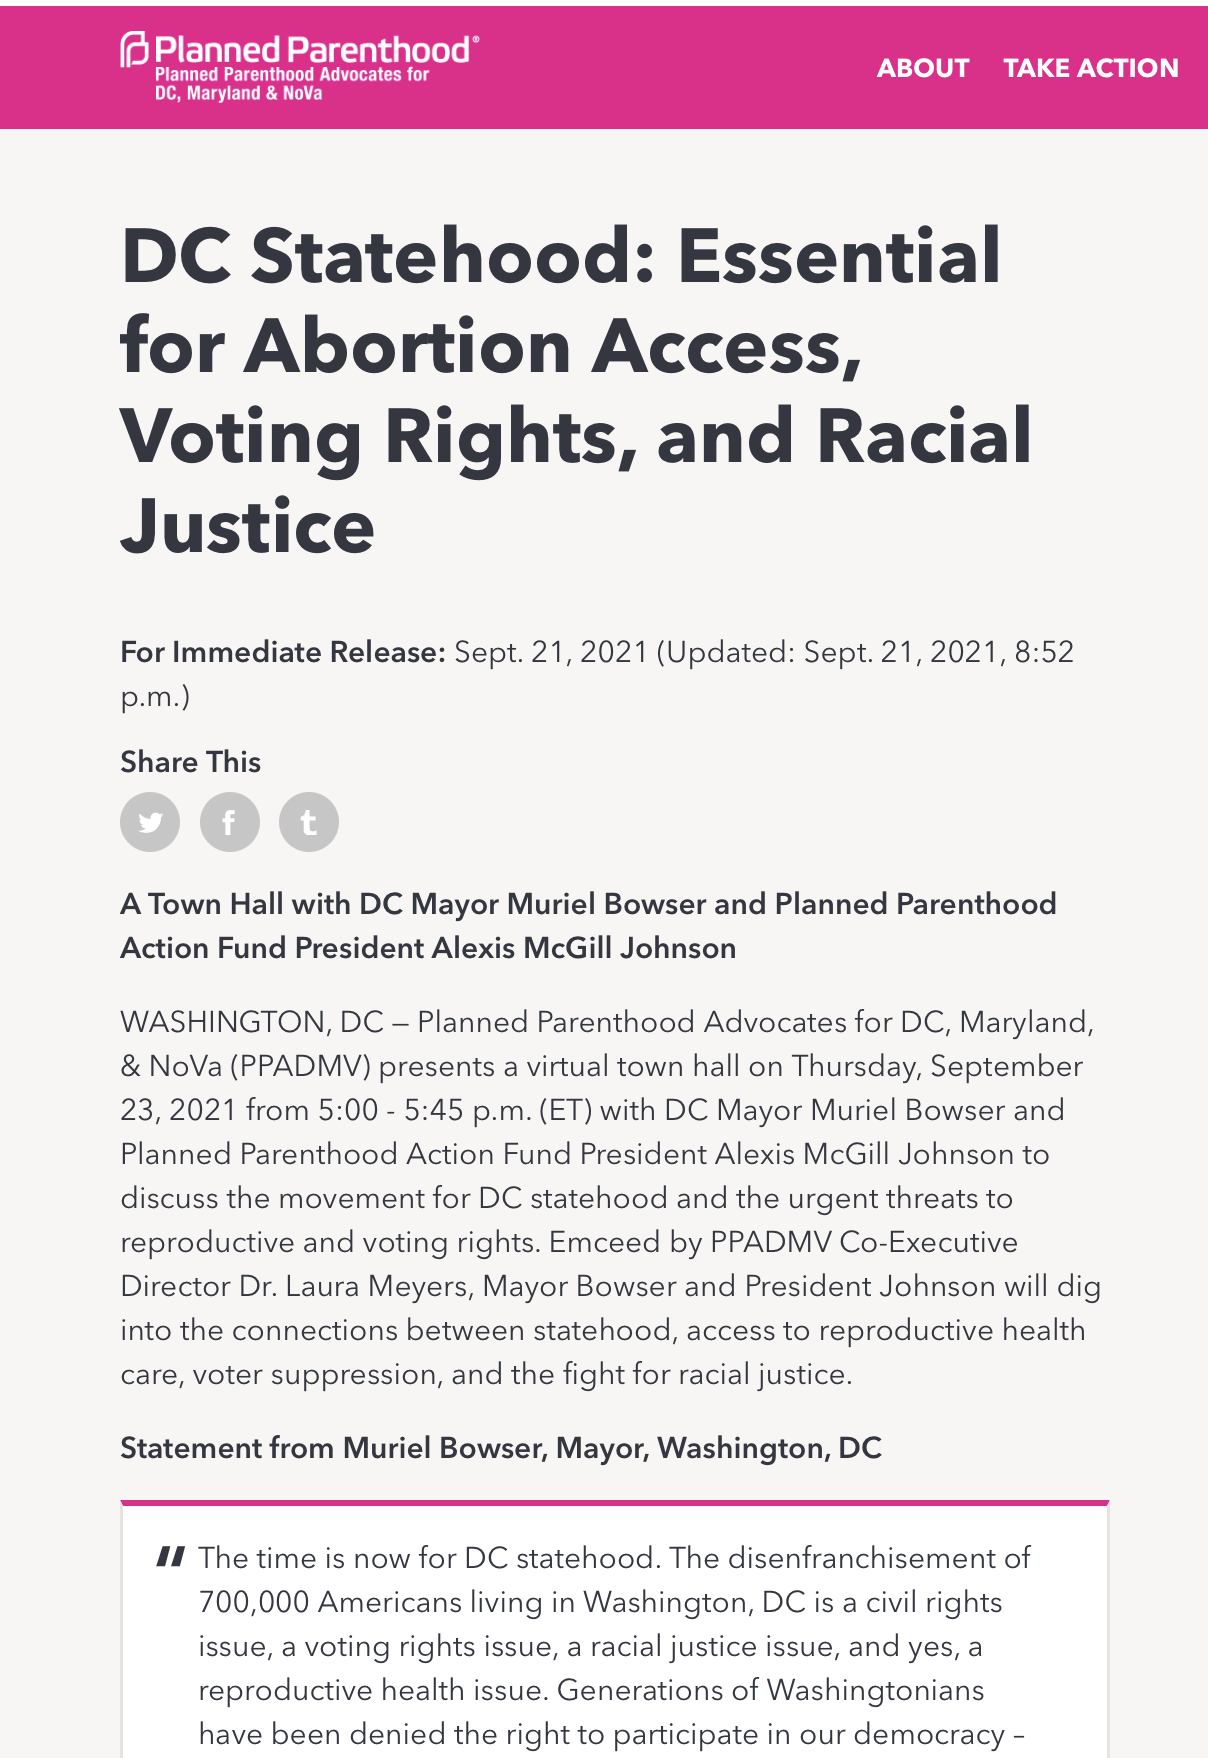 Muriel Bowser stands with Planned Parenthood - the leading killer of black lives.